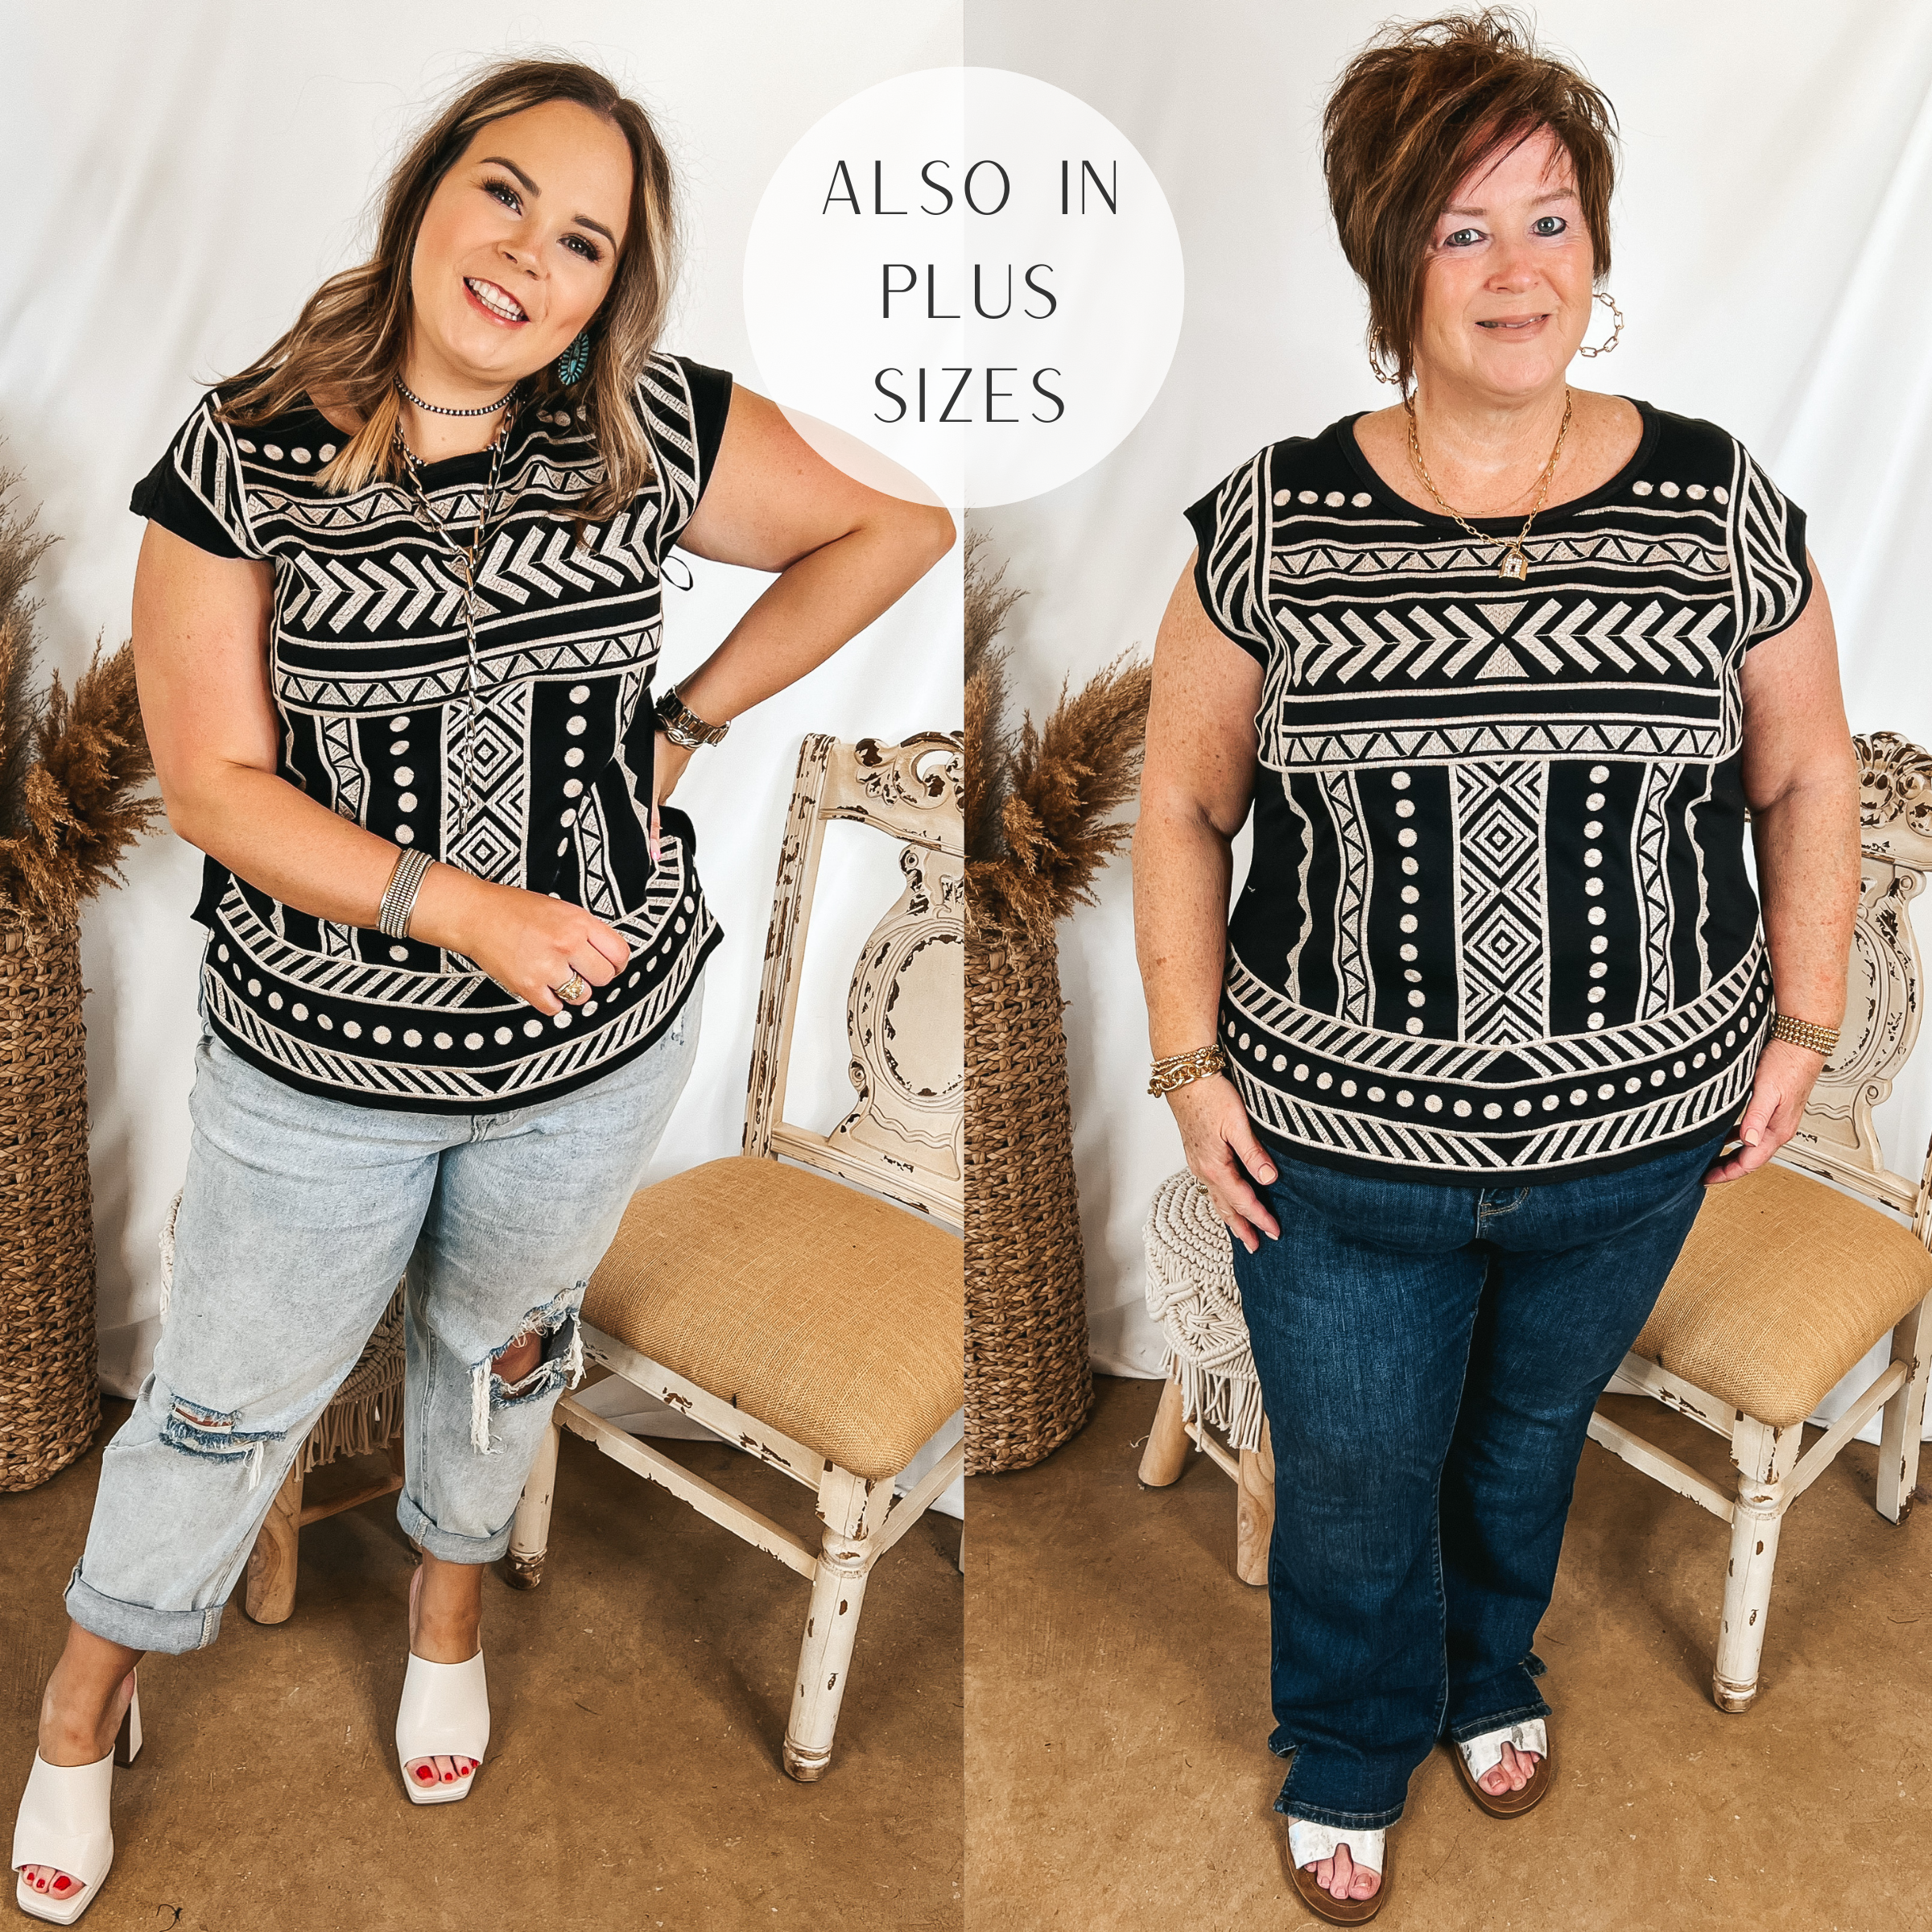 Models are wearing a black cap sleeve top that has ivory embroidery on the front. Size large model has it paired with light wash jeans, white heels, and silver jewelry. Plus size model has it paired with bootcut jeans, white sandals, and gold jewelry.